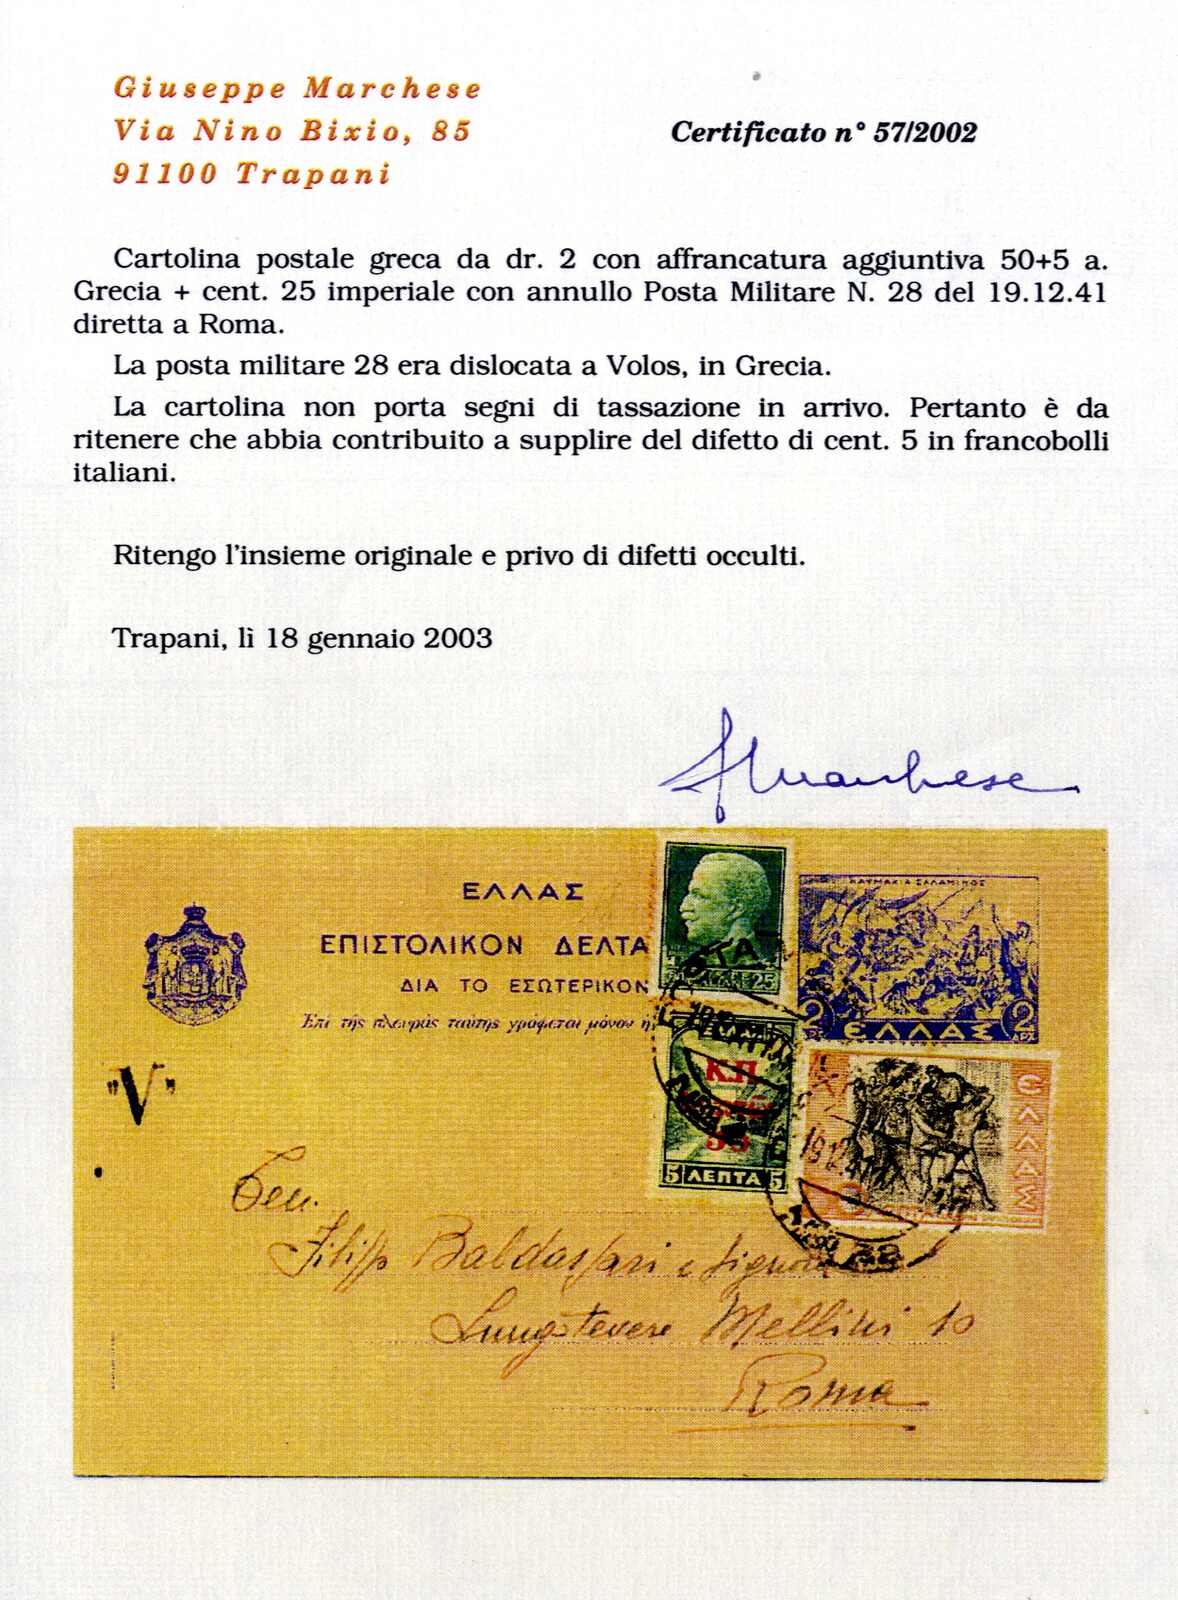 Lot 726 - europe Italian Kingdom -  Viennafil Auktionen Auction #69 Worldwide Mail Auction: Italy, Austria, Germany, Europe and Overseas